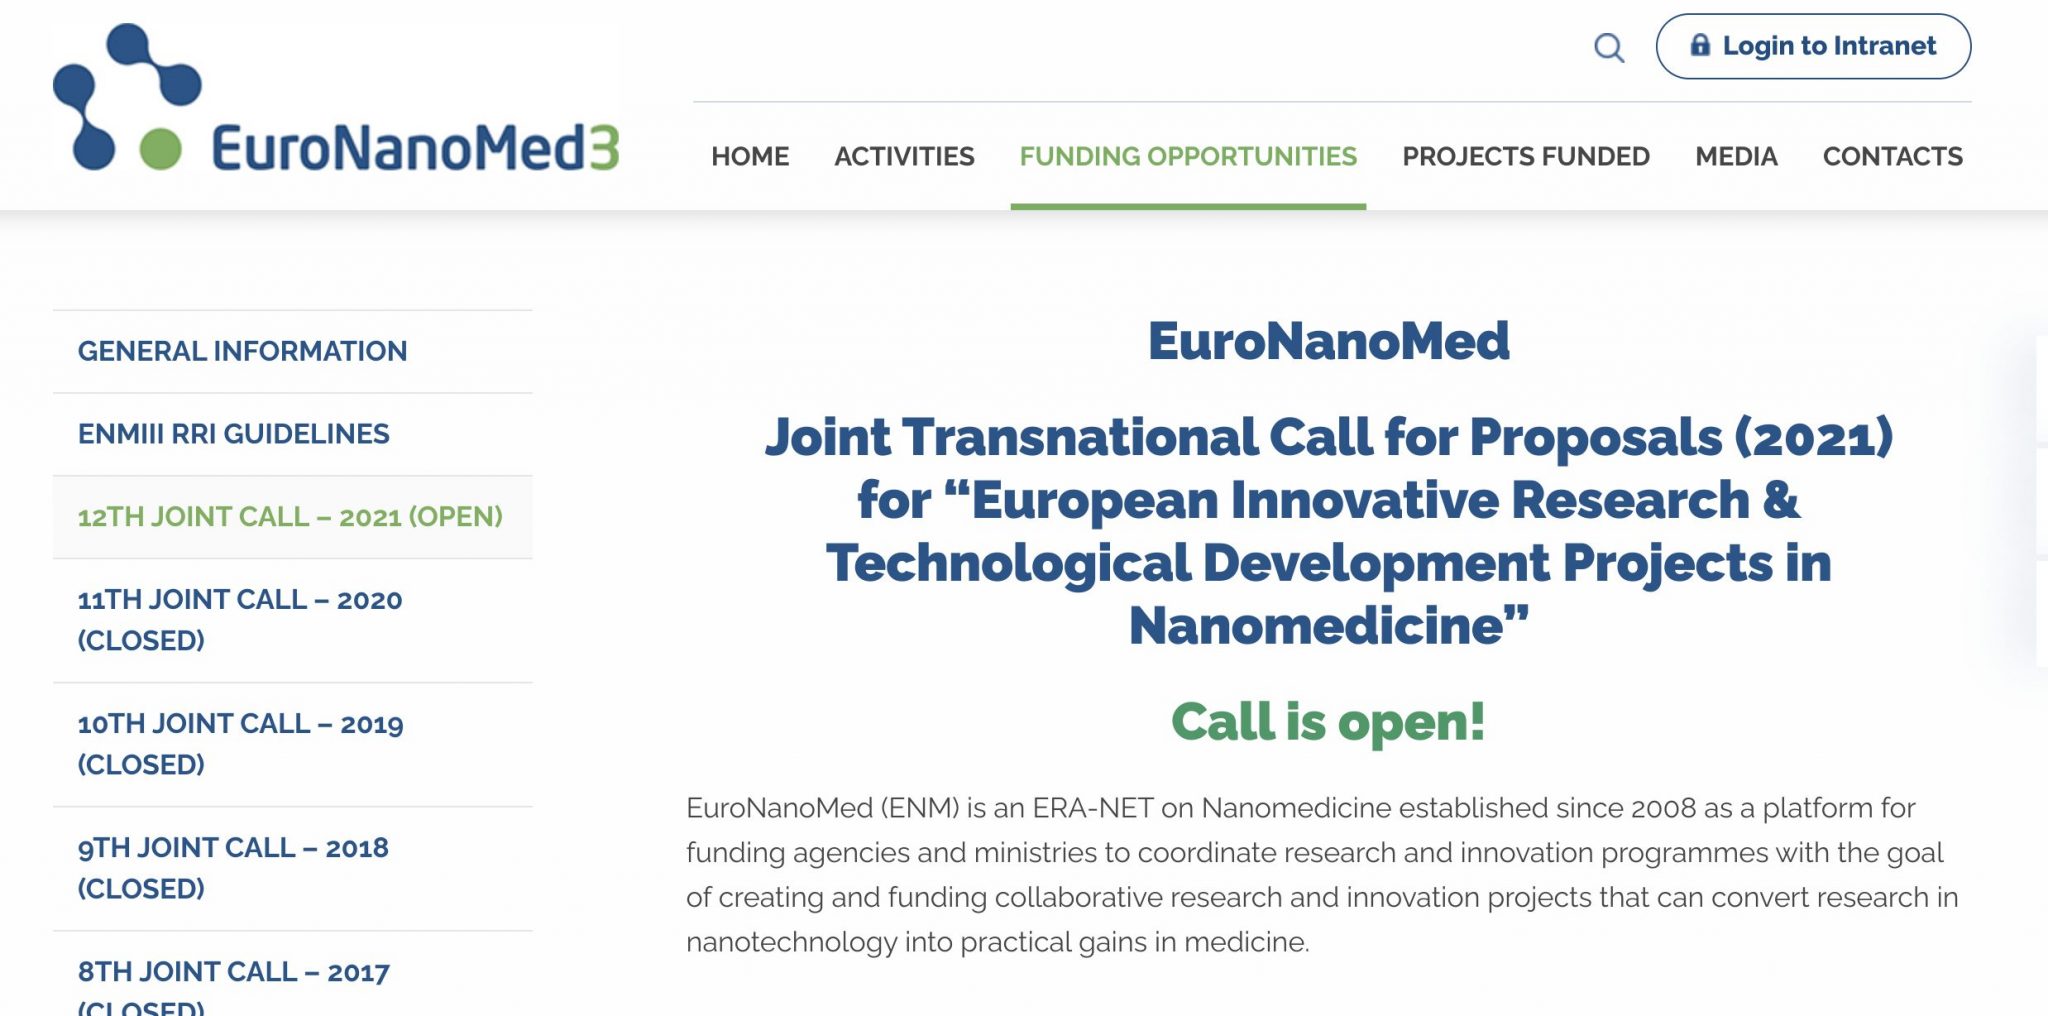 OPEN! EuroNanoMed Joint Transnational Call for Proposals (2021) for “European Innovative Research & Technological Development Projects in Nanomedicine”